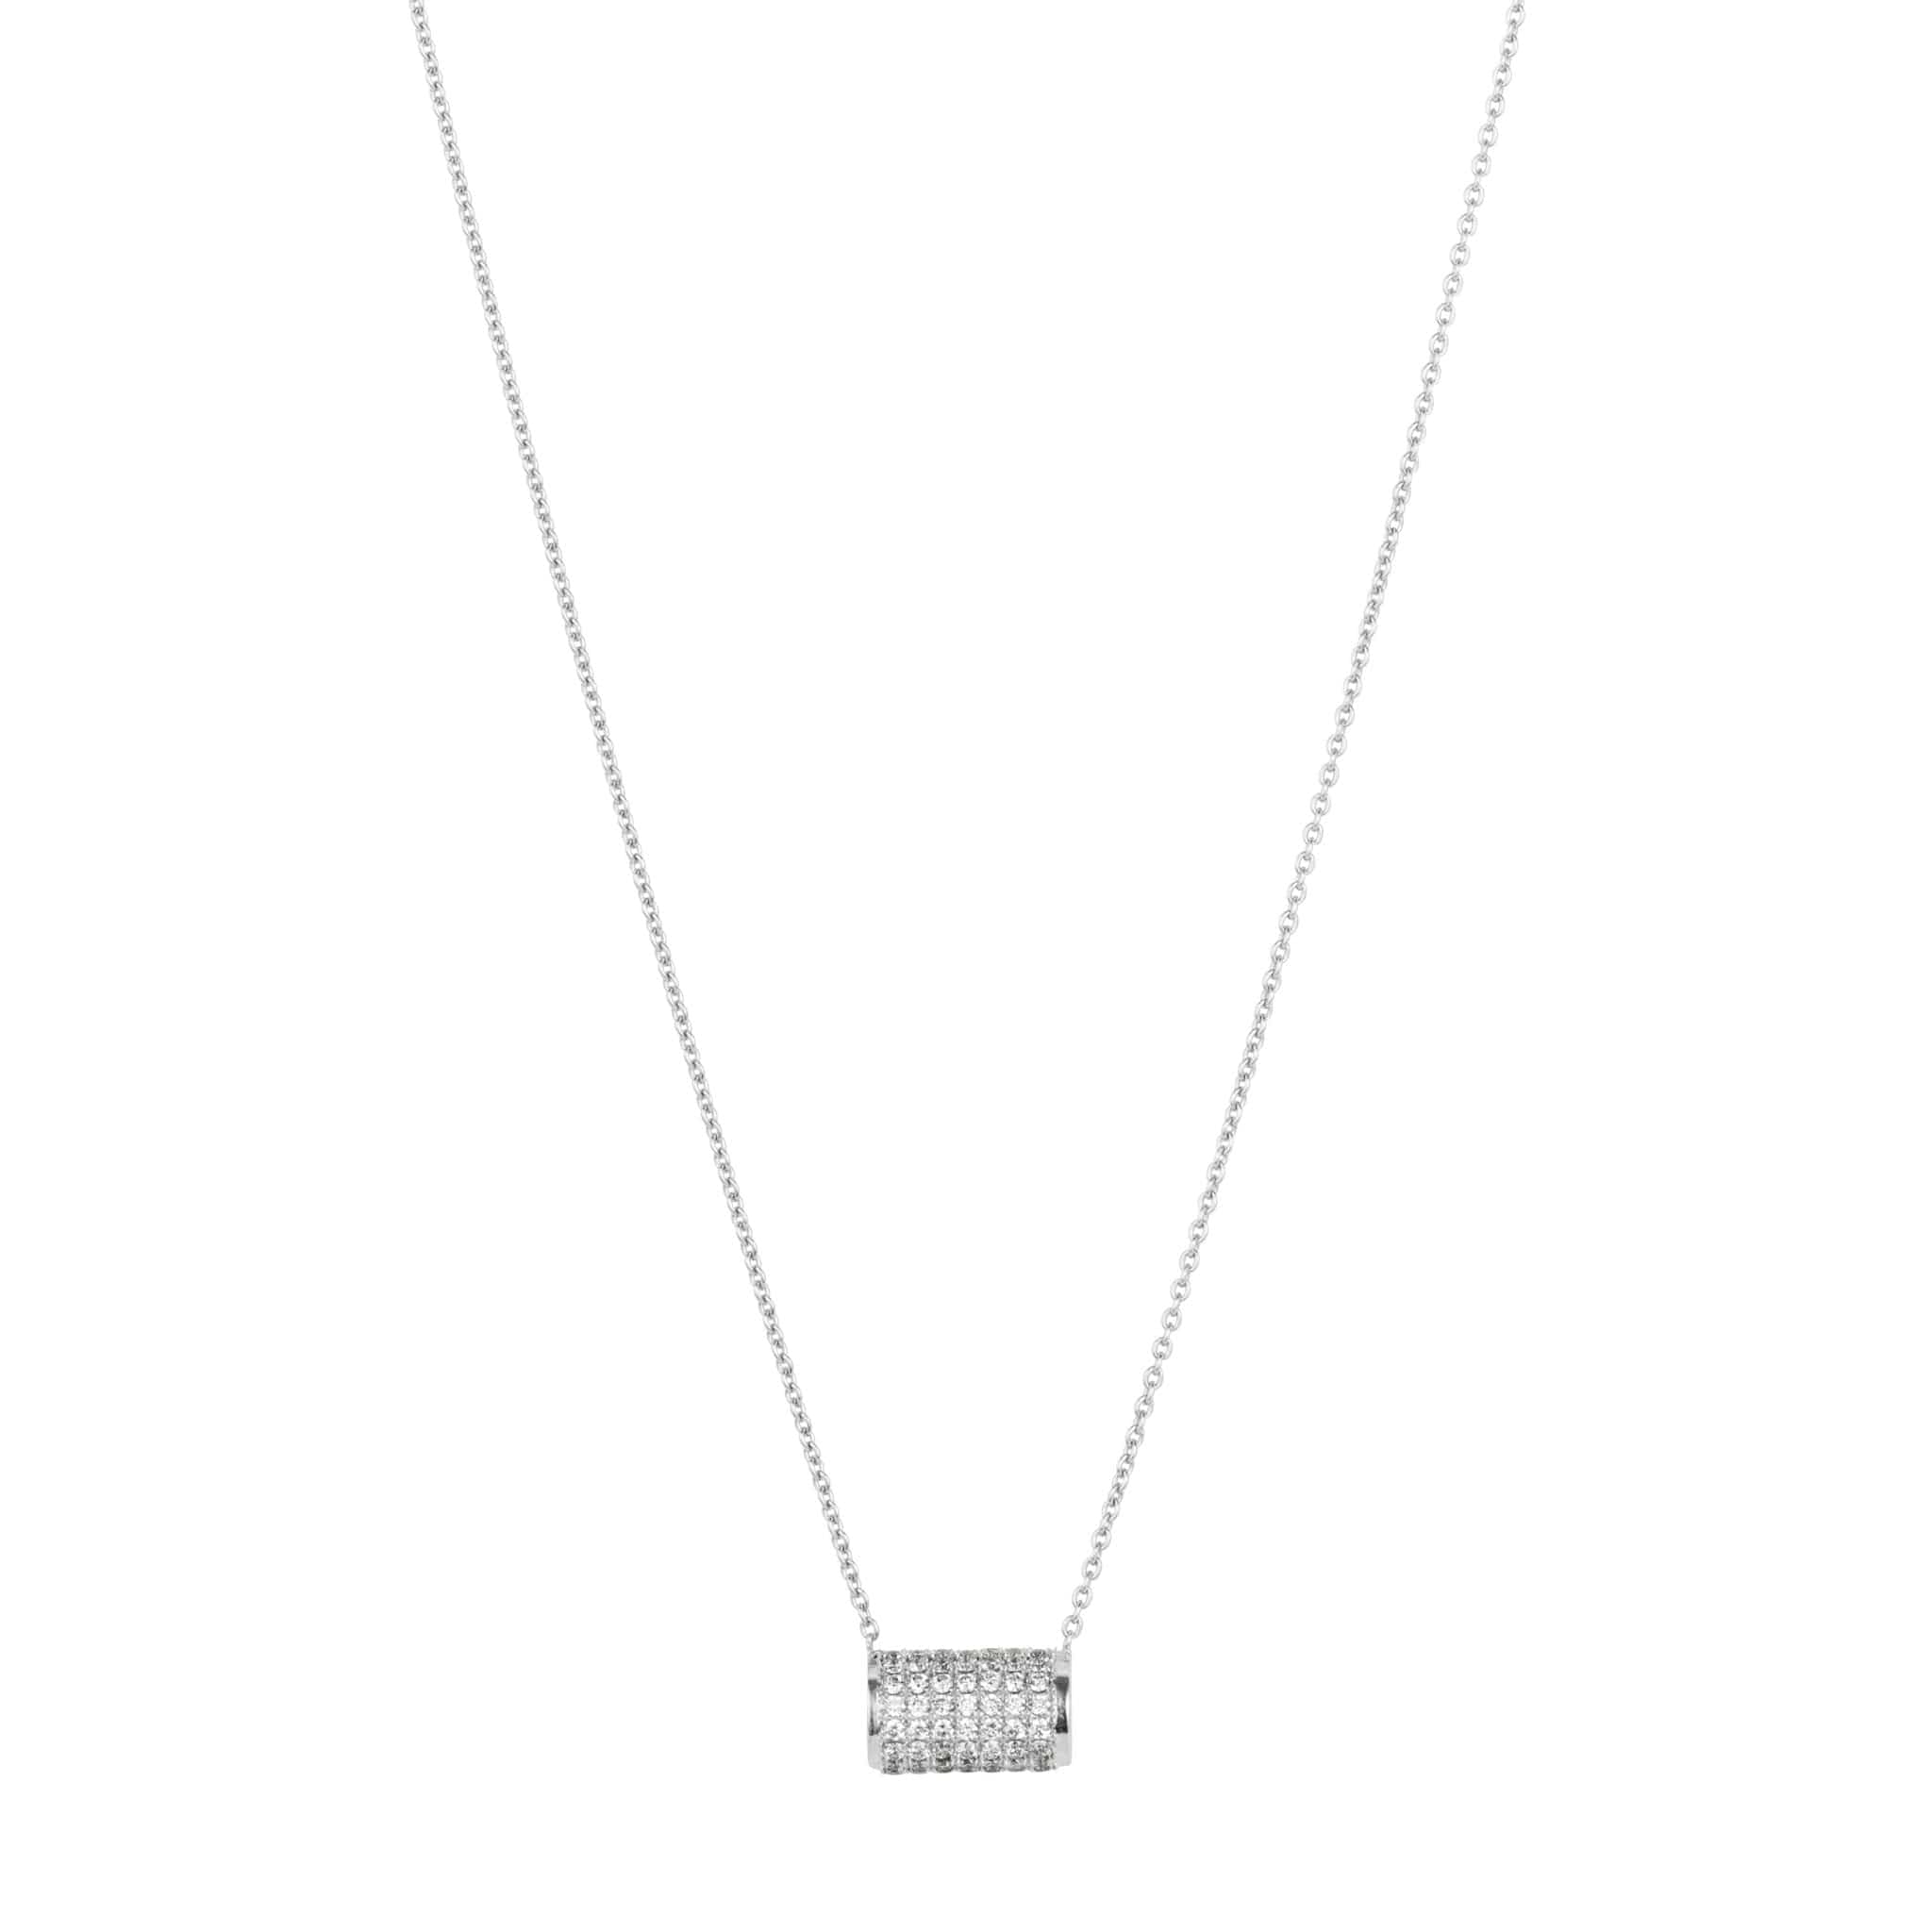 Cylinder pendant necklace and chain